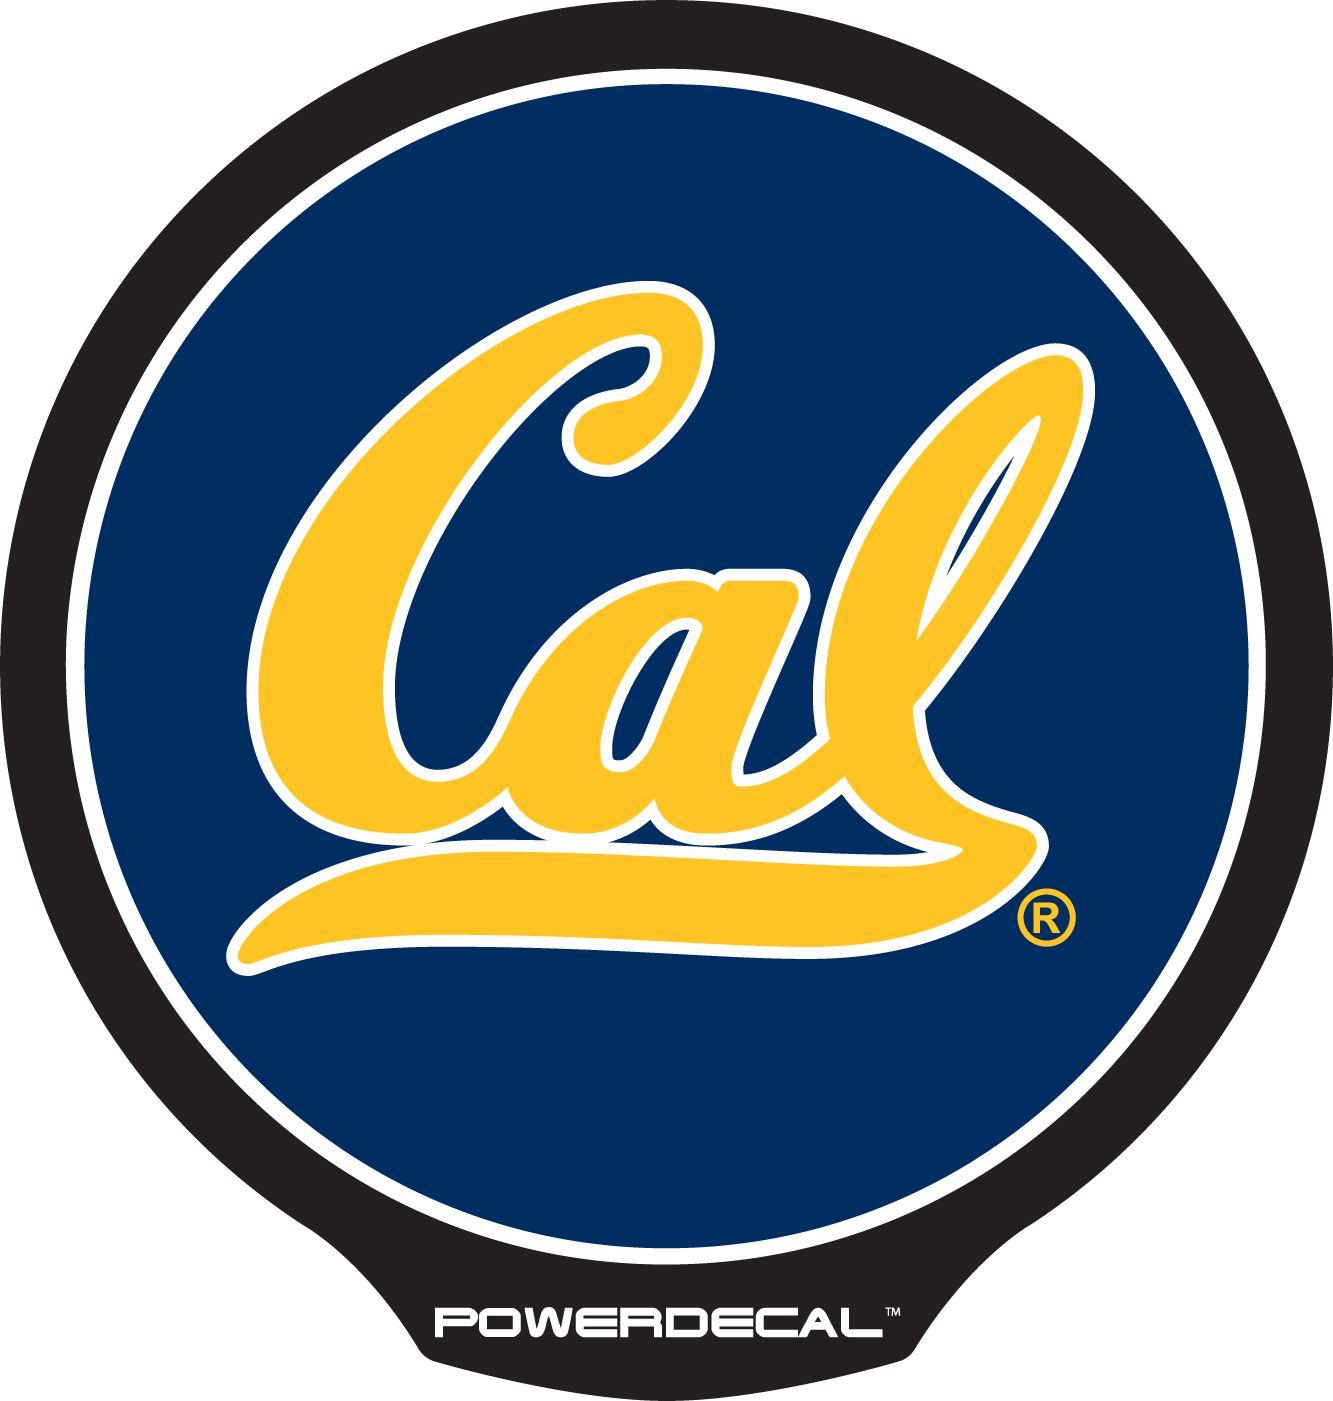 Blue and Yellow College Logo - PowerDecal PWR290601 Decal College University Of California Logo ...